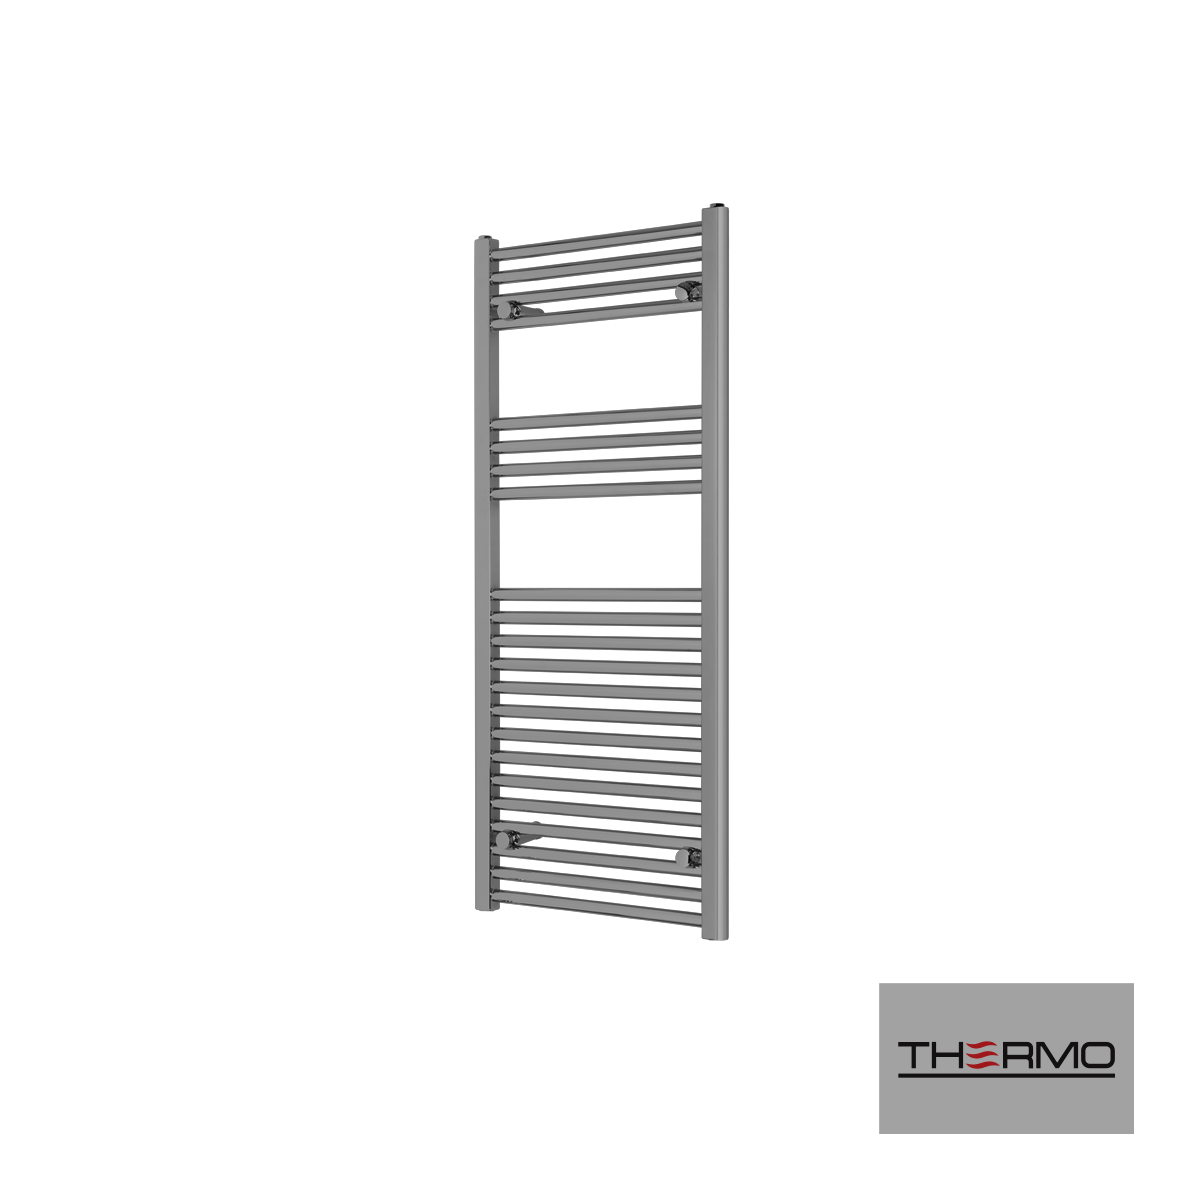 Heated towel rail ALTO 120χ50from MILD STEEL with hydraulic or e